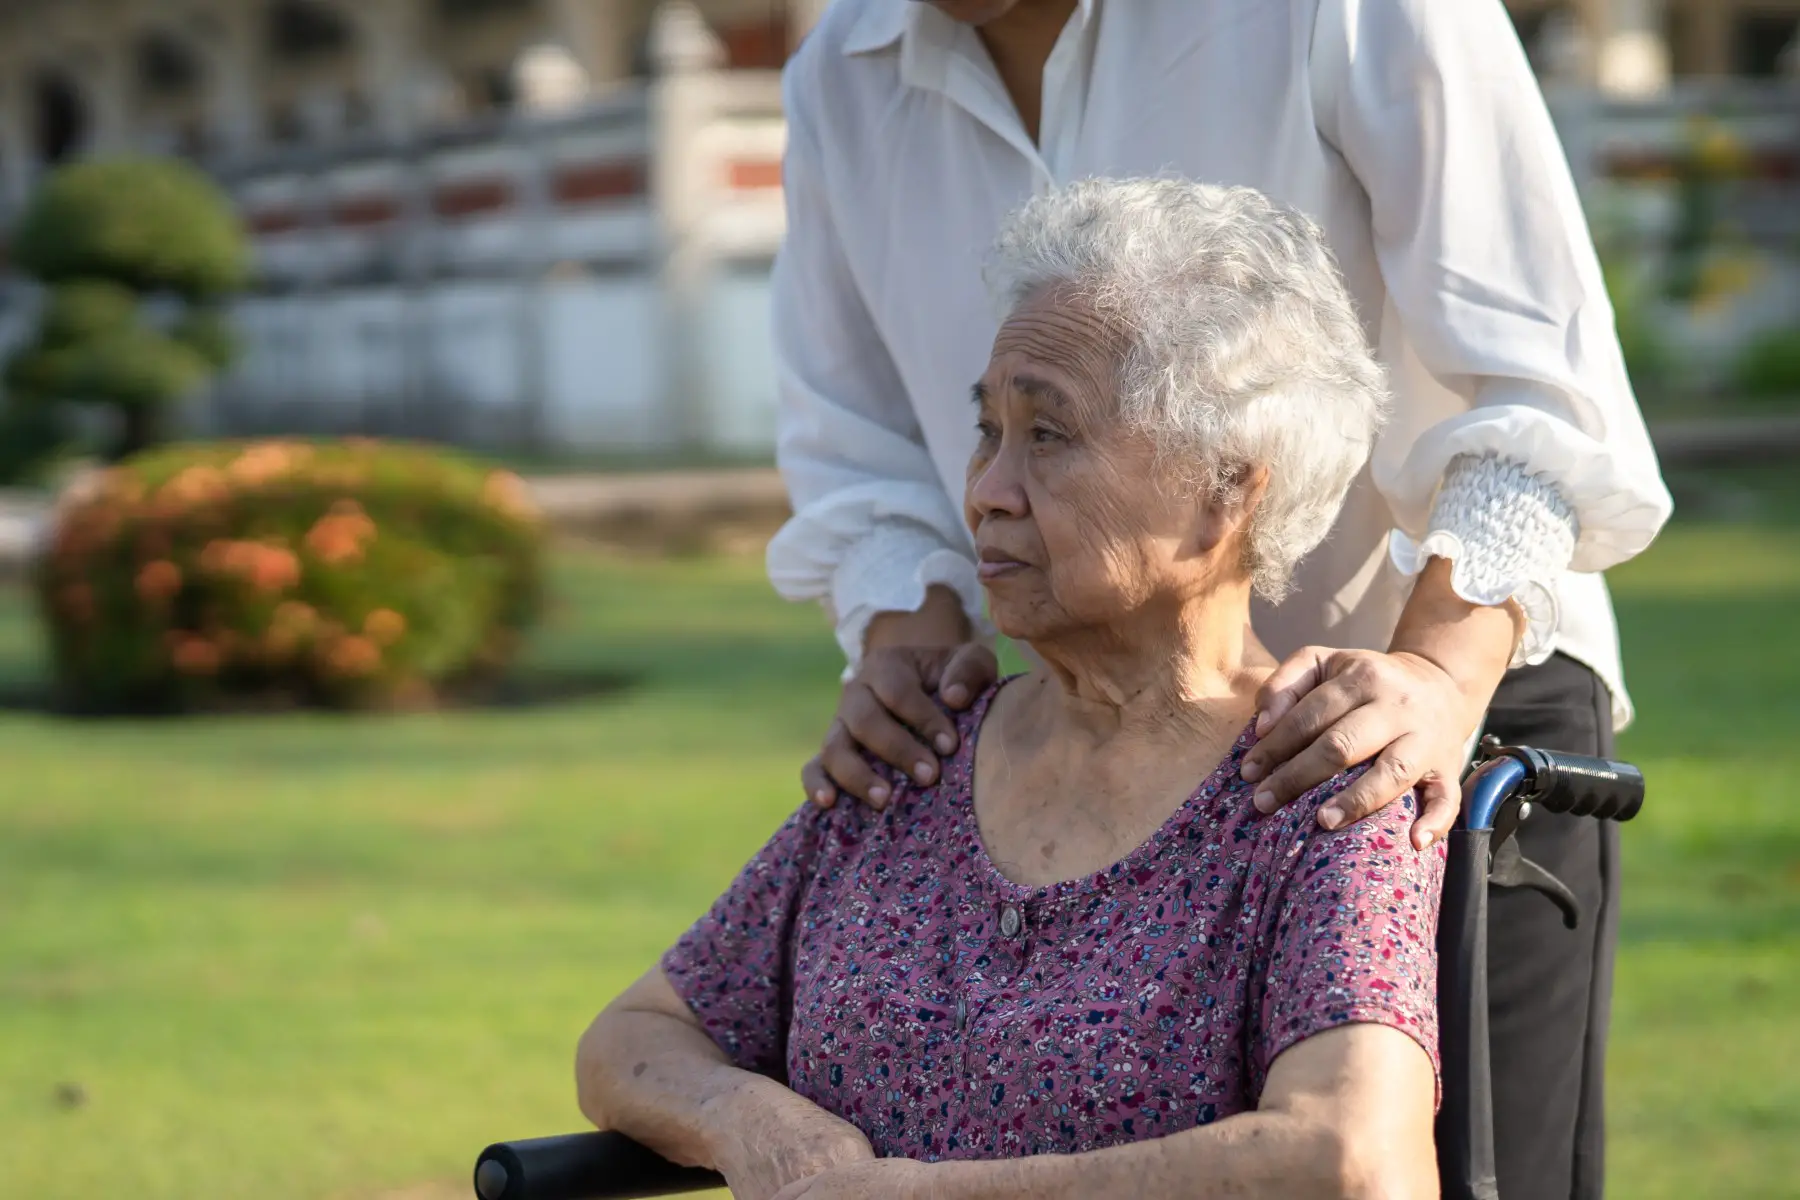 Elderly lady sitting on wheelchair in park, caregiver standing behind her with their hands on her shoulders.